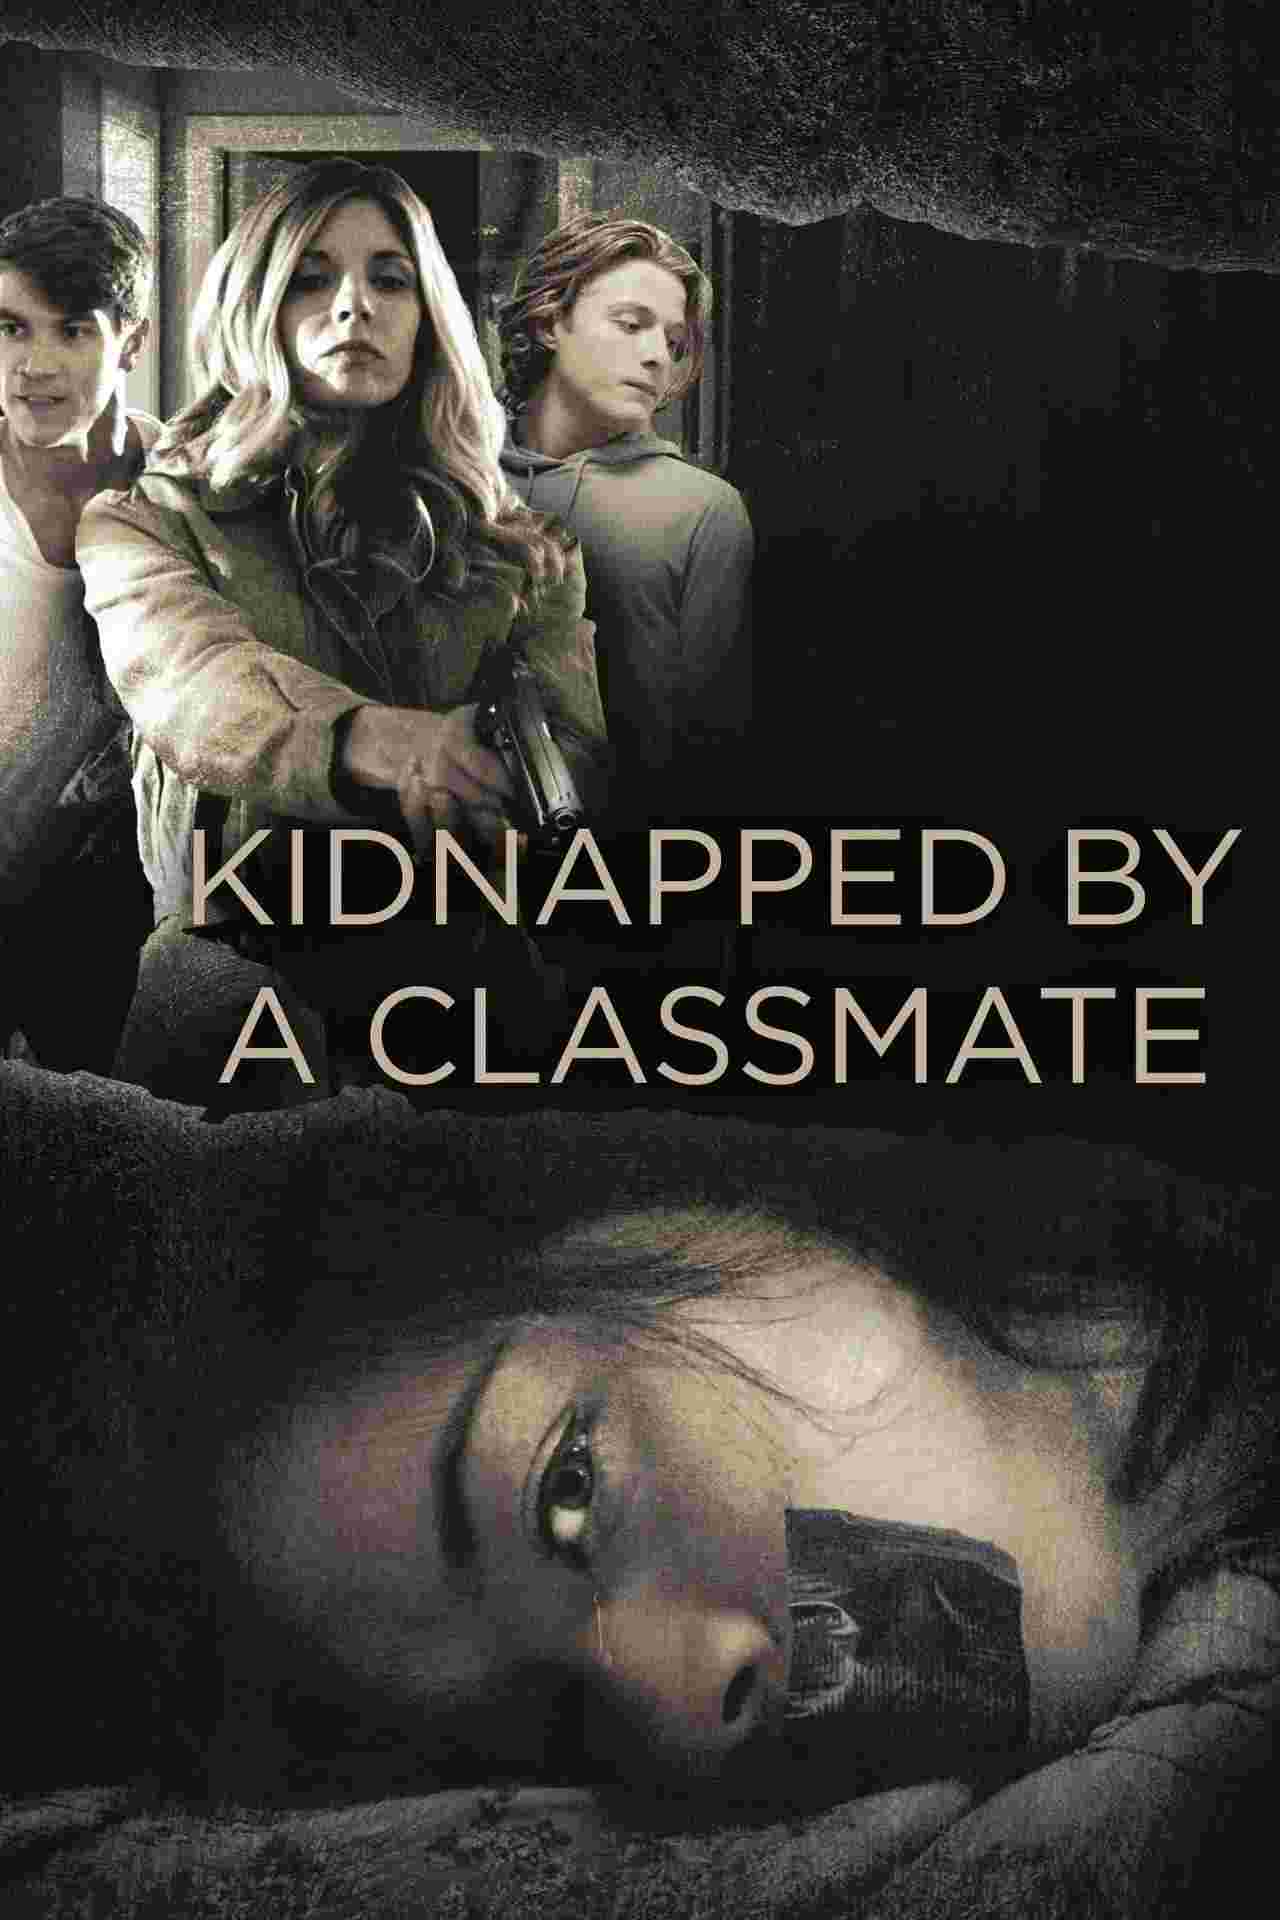 Kidnapped by a Classmate (2020) Andrea Bogart